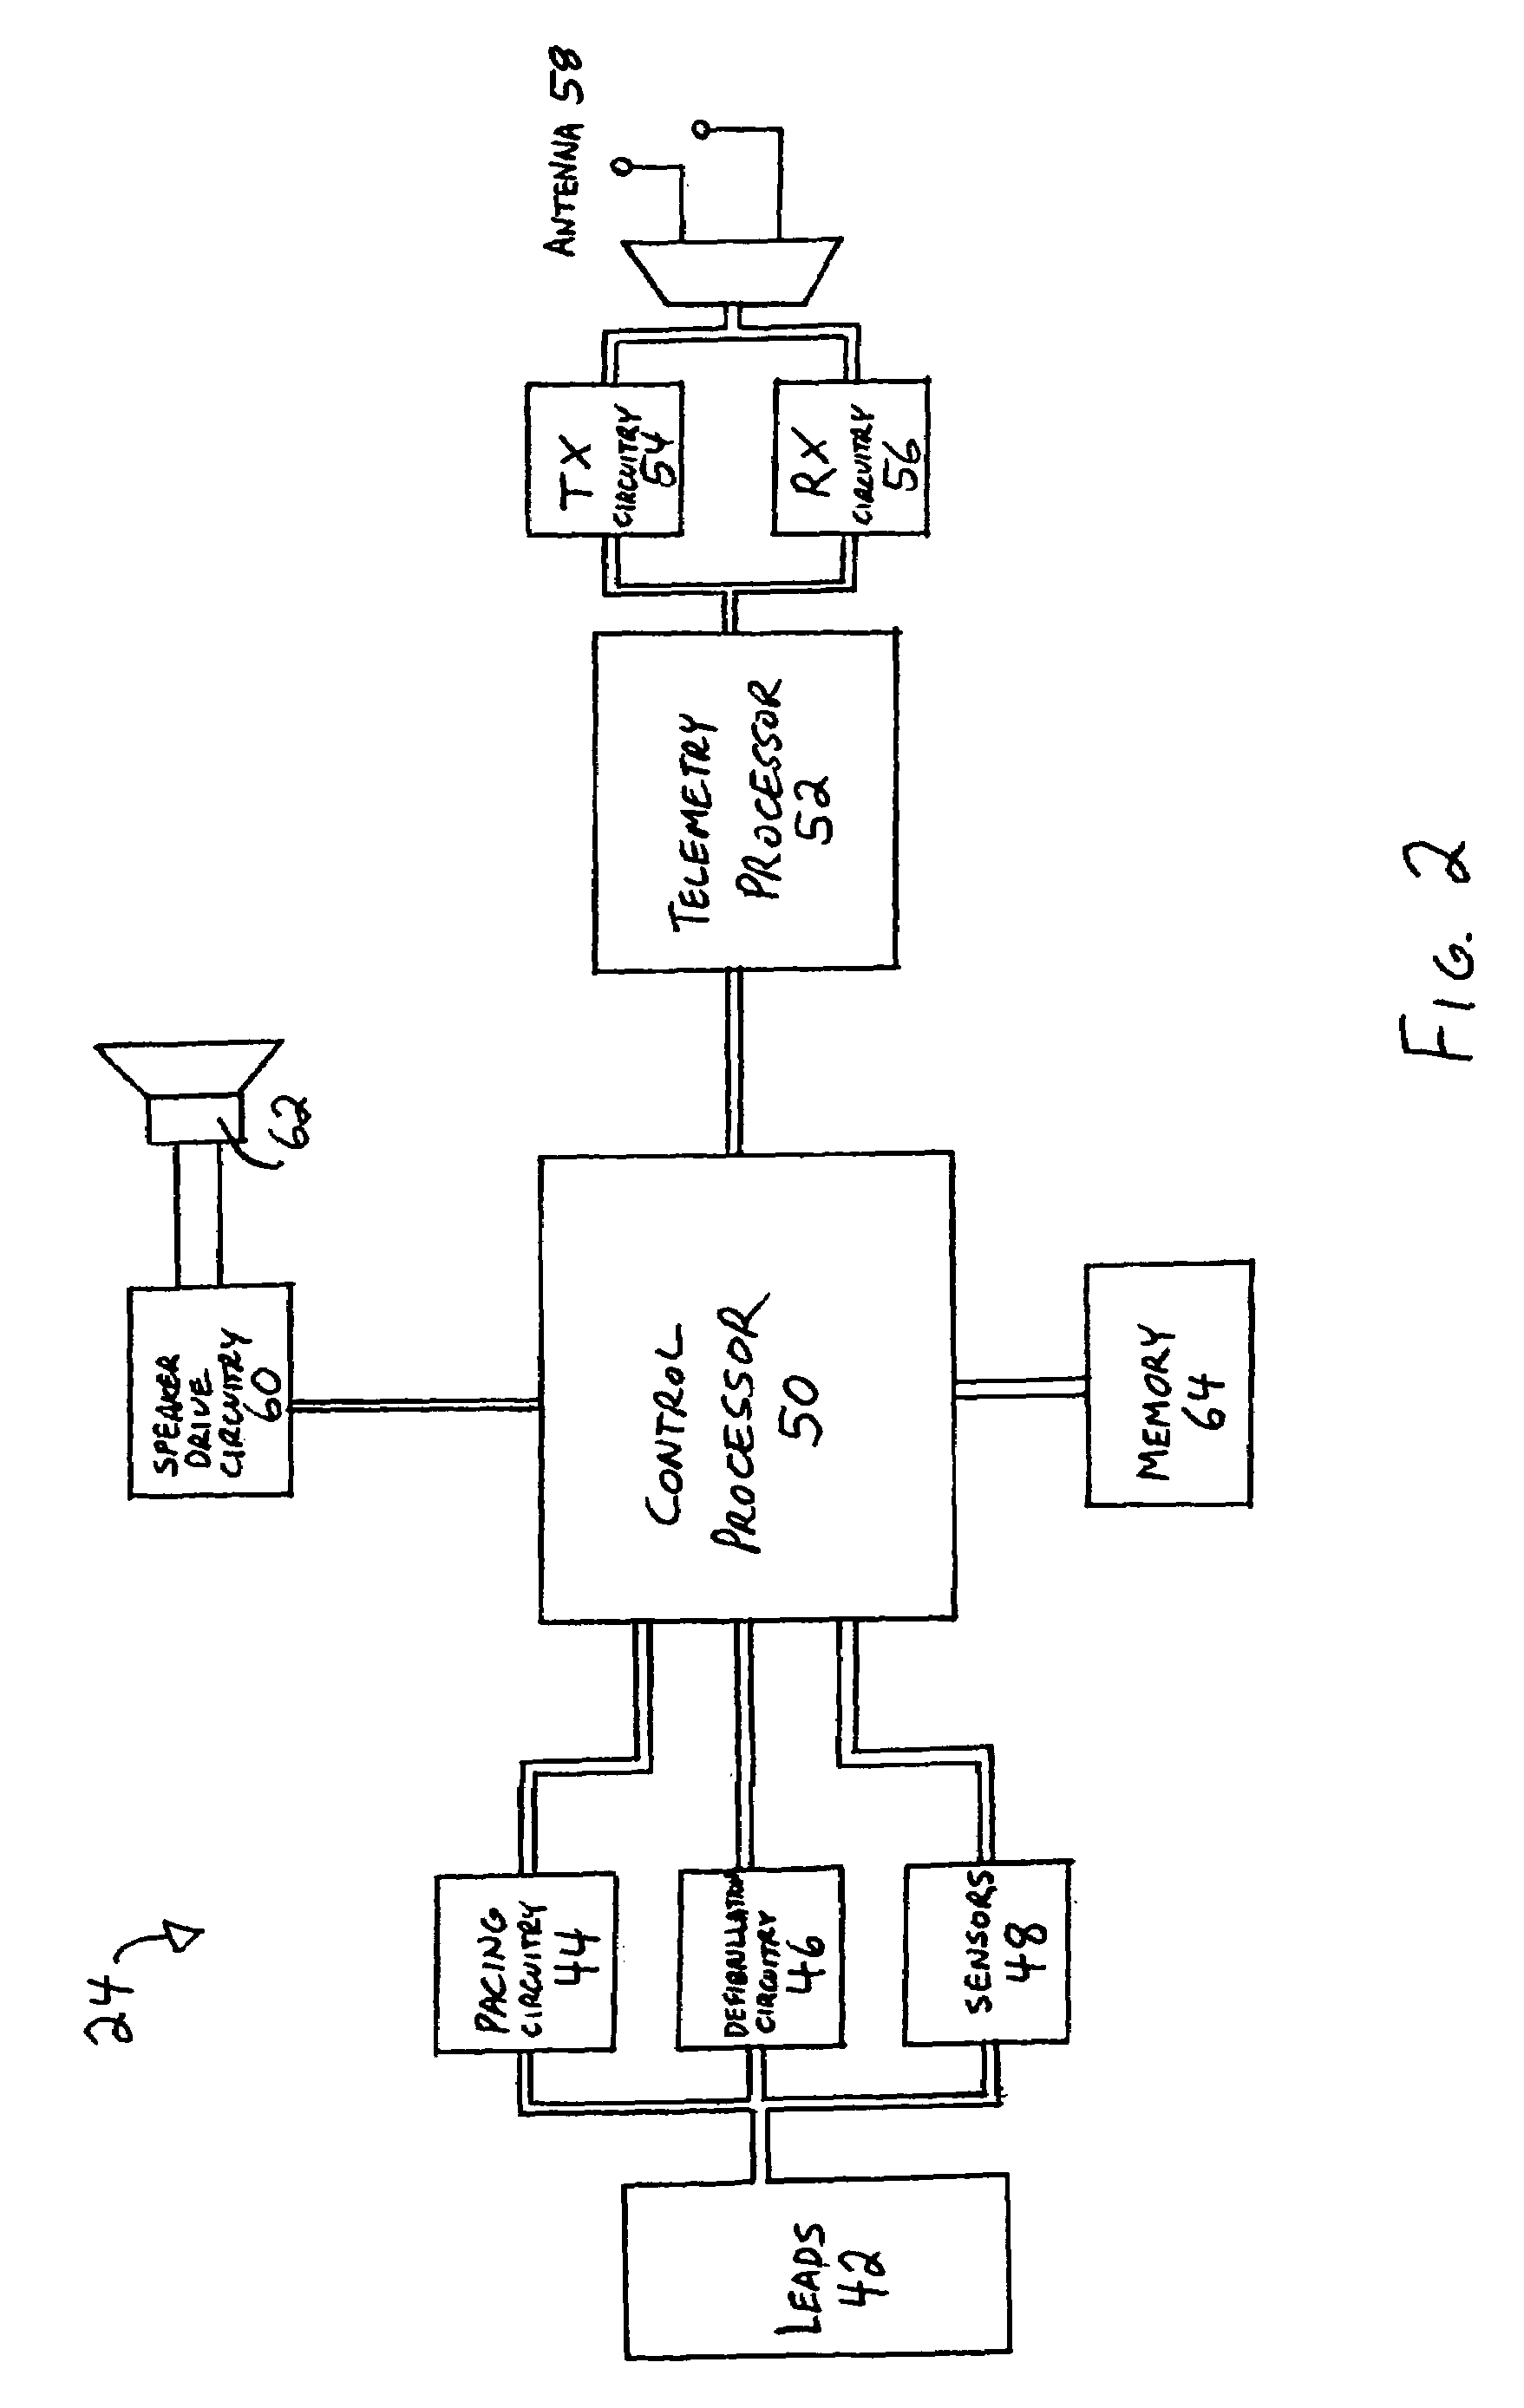 Alert system and method for an implantable medical device